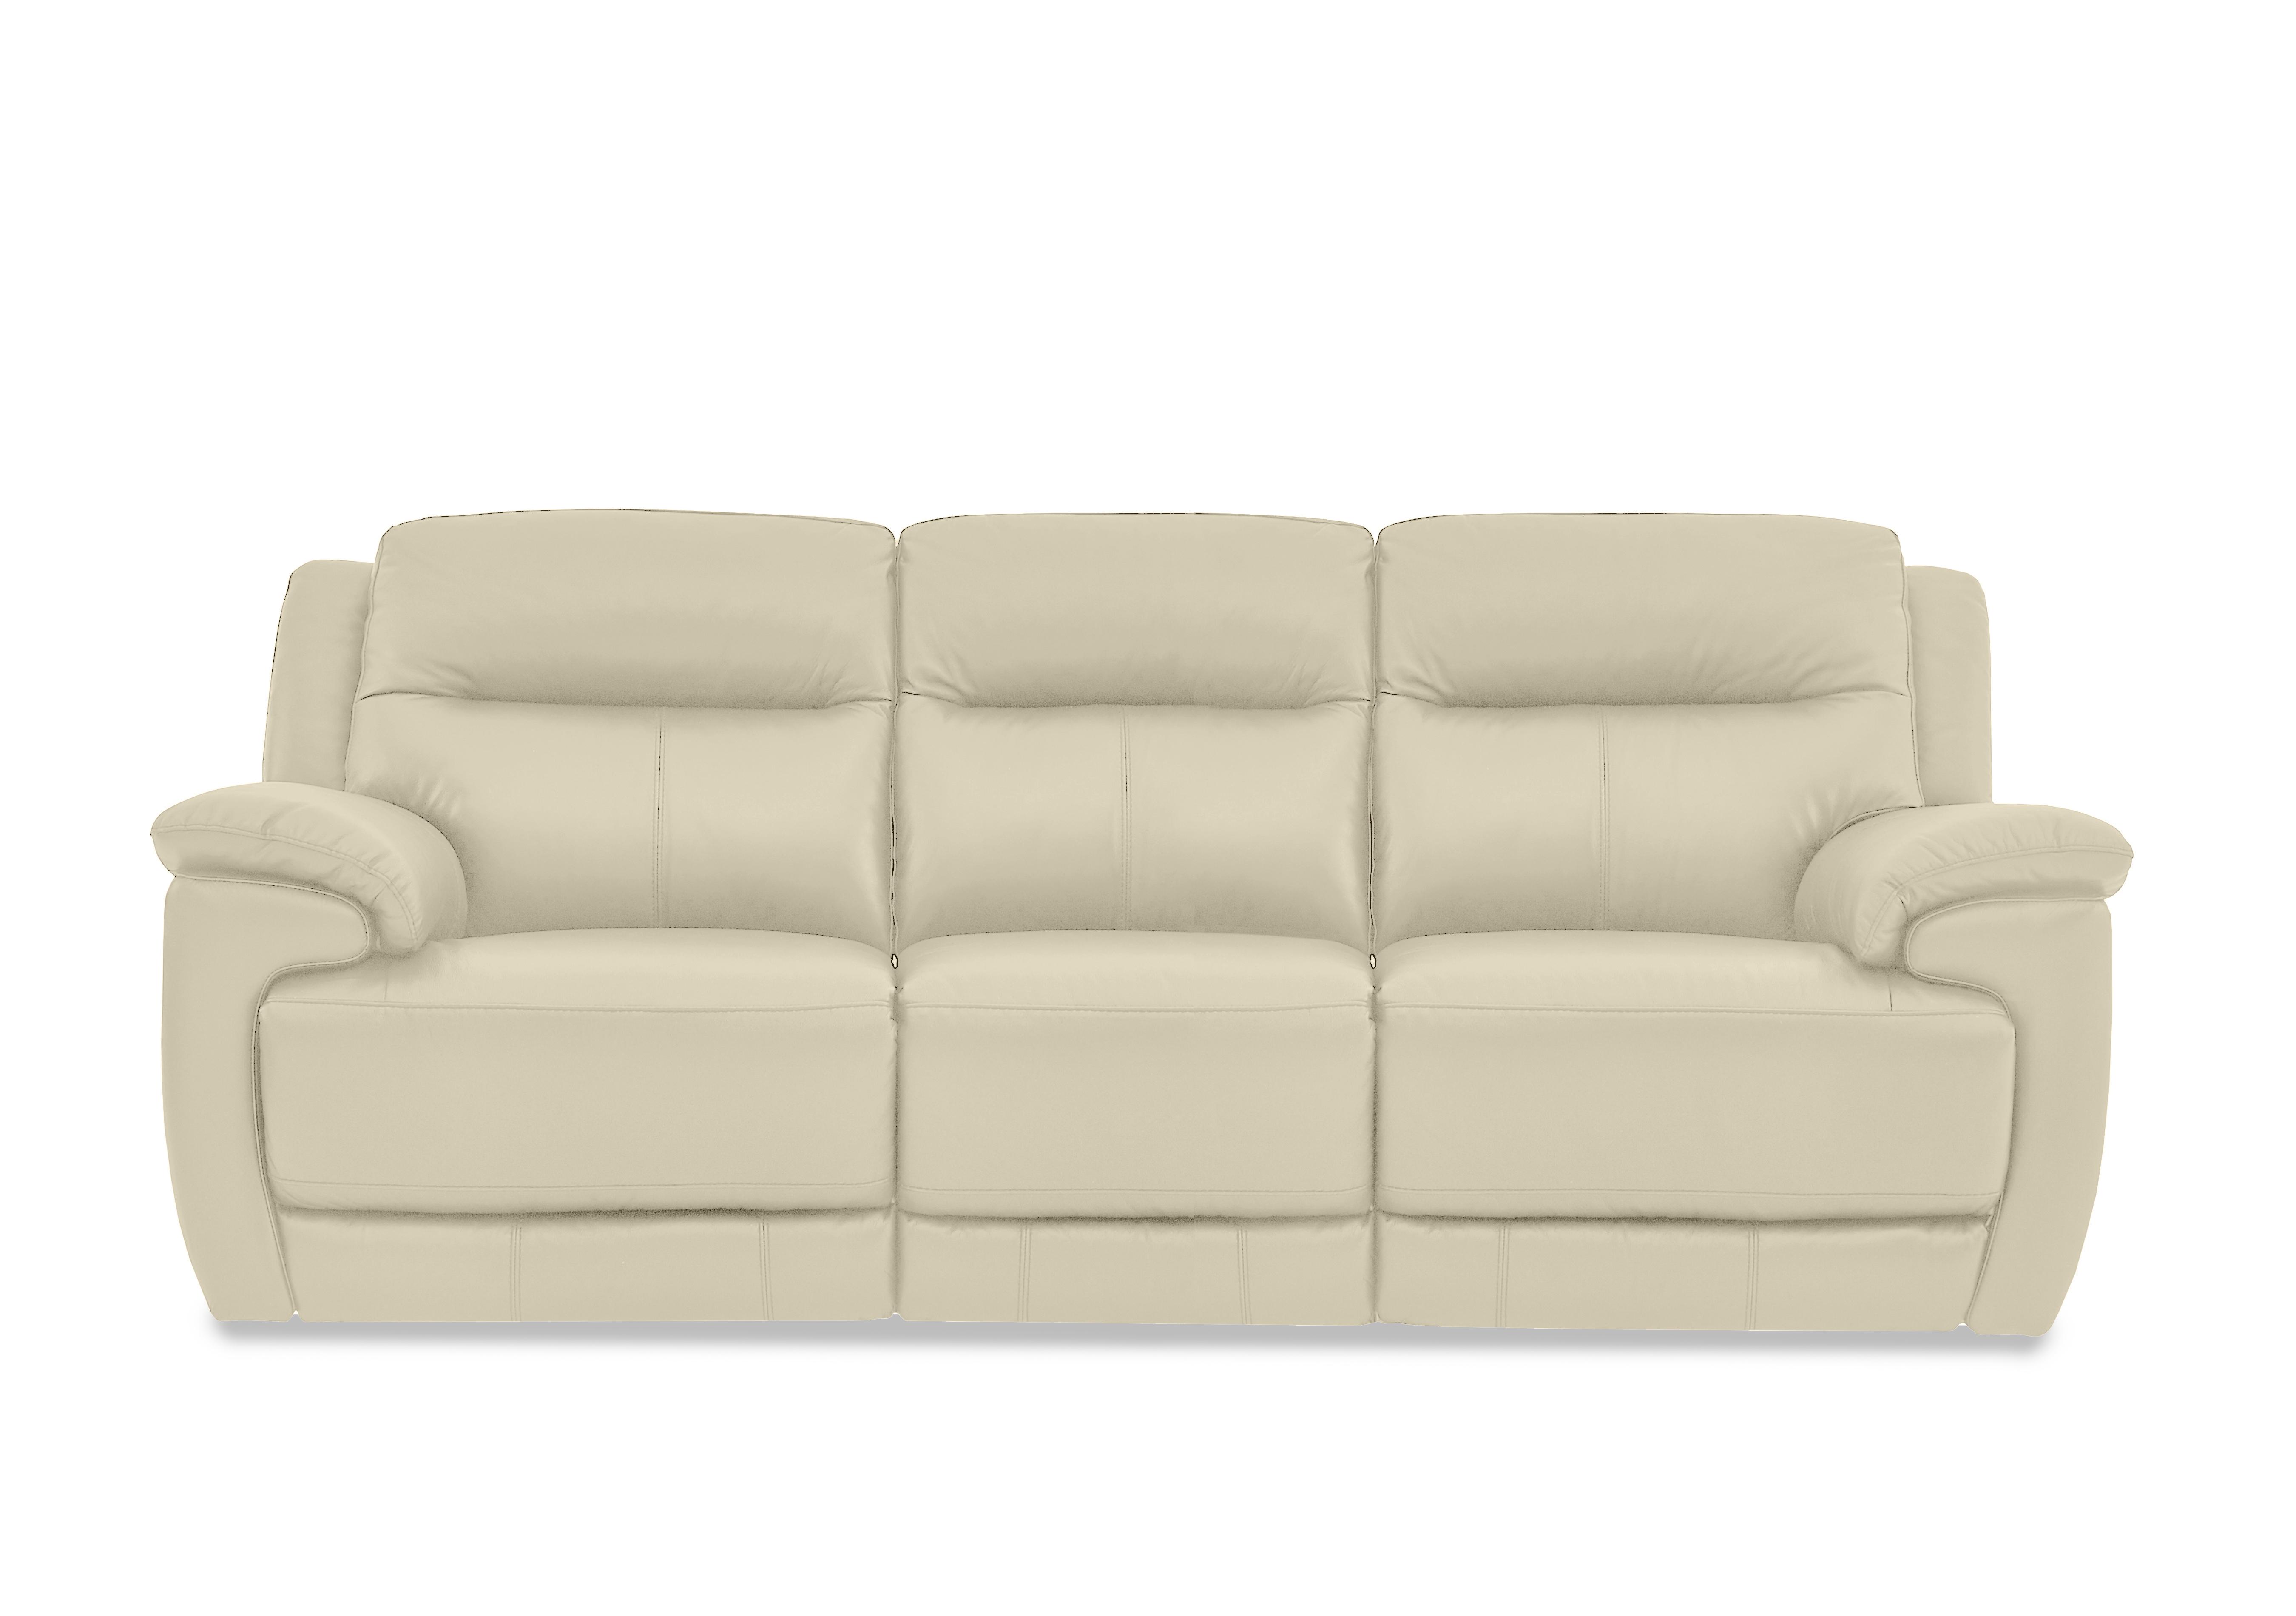 Touch 3 Seater Leather Sofa in Bv-862c Bisque on Furniture Village